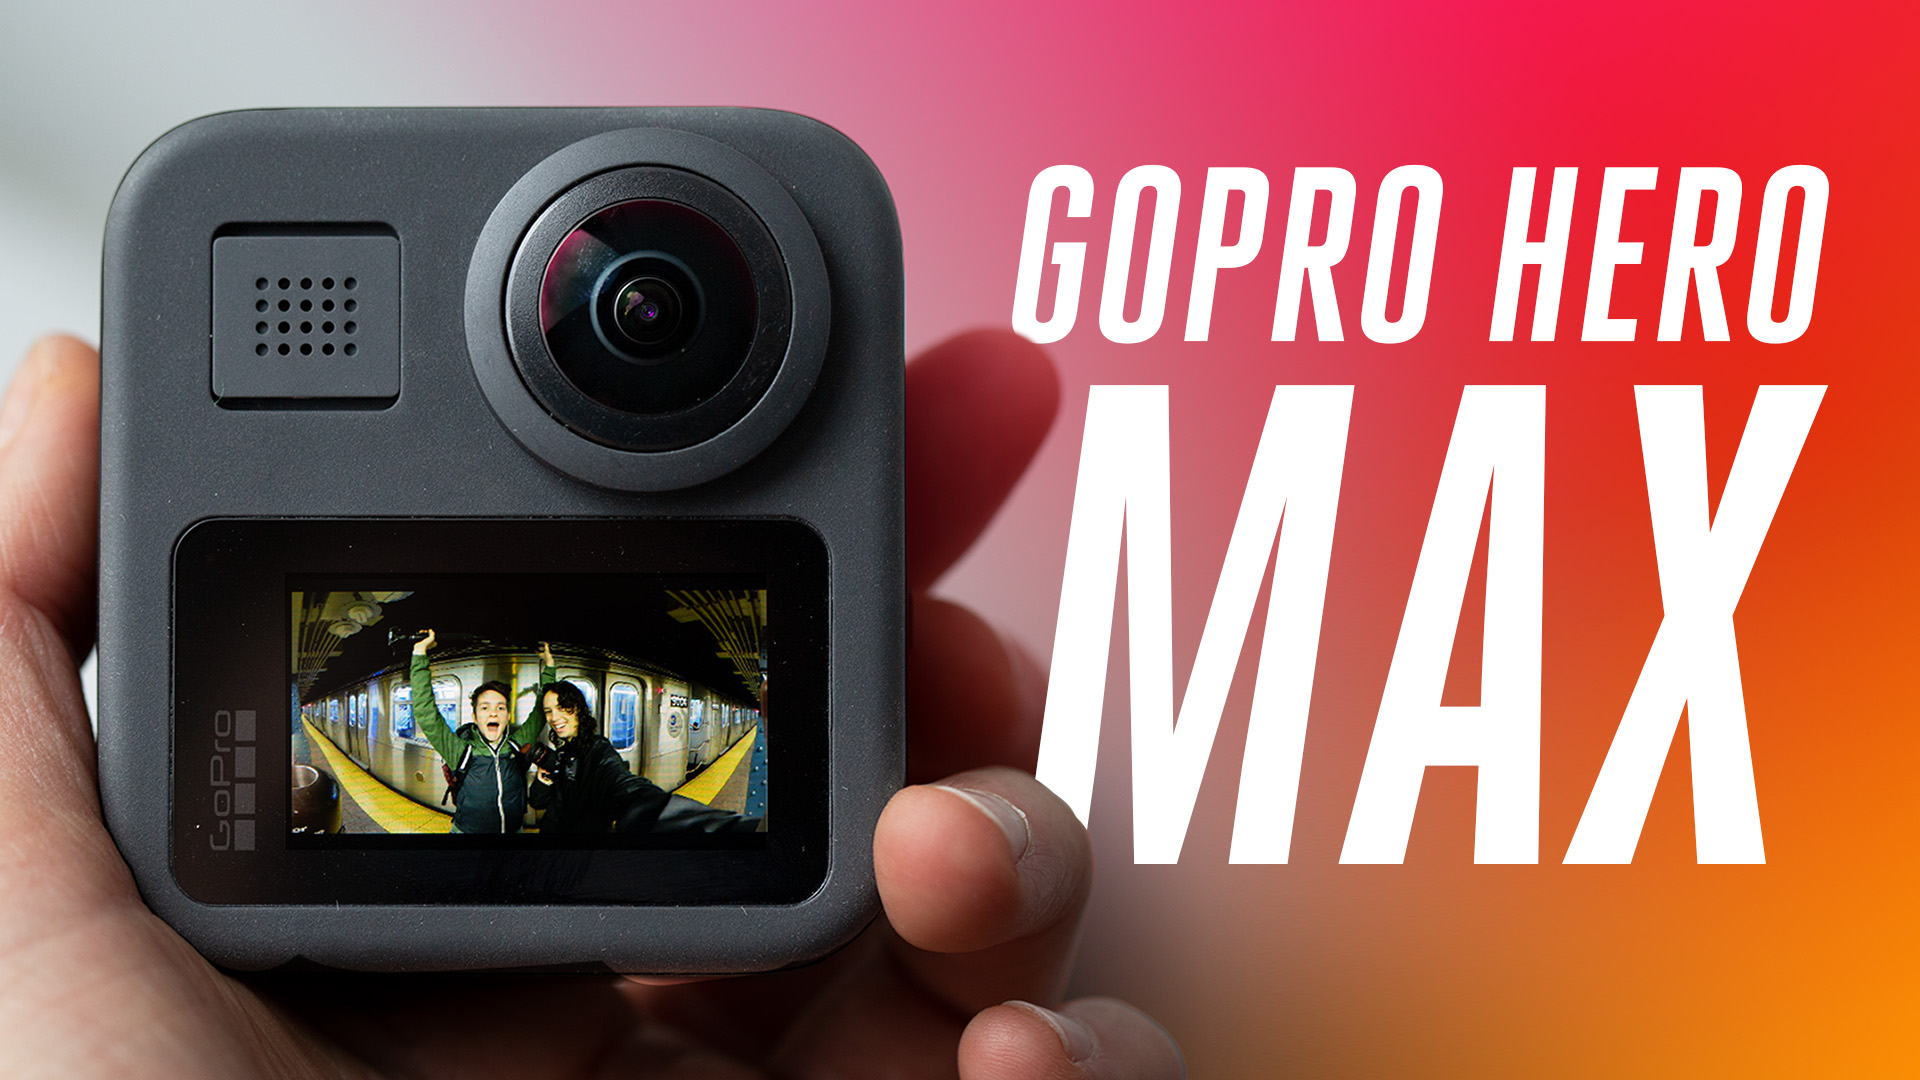 Fstoppers Reviews the GoPro MAX 360° Camera